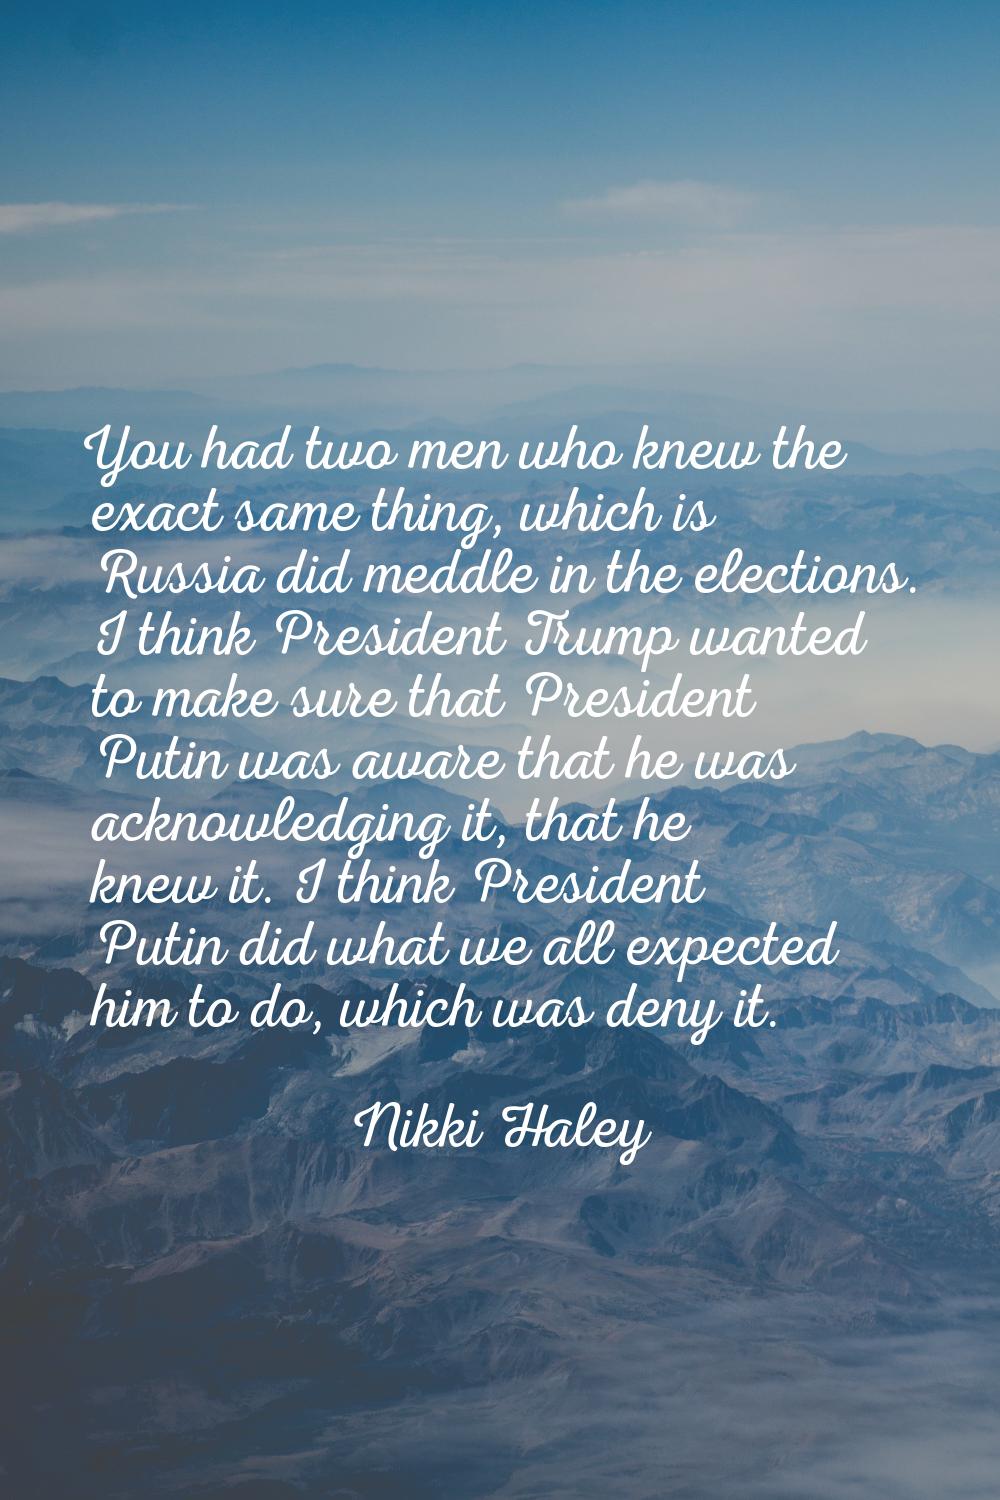 You had two men who knew the exact same thing, which is Russia did meddle in the elections. I think